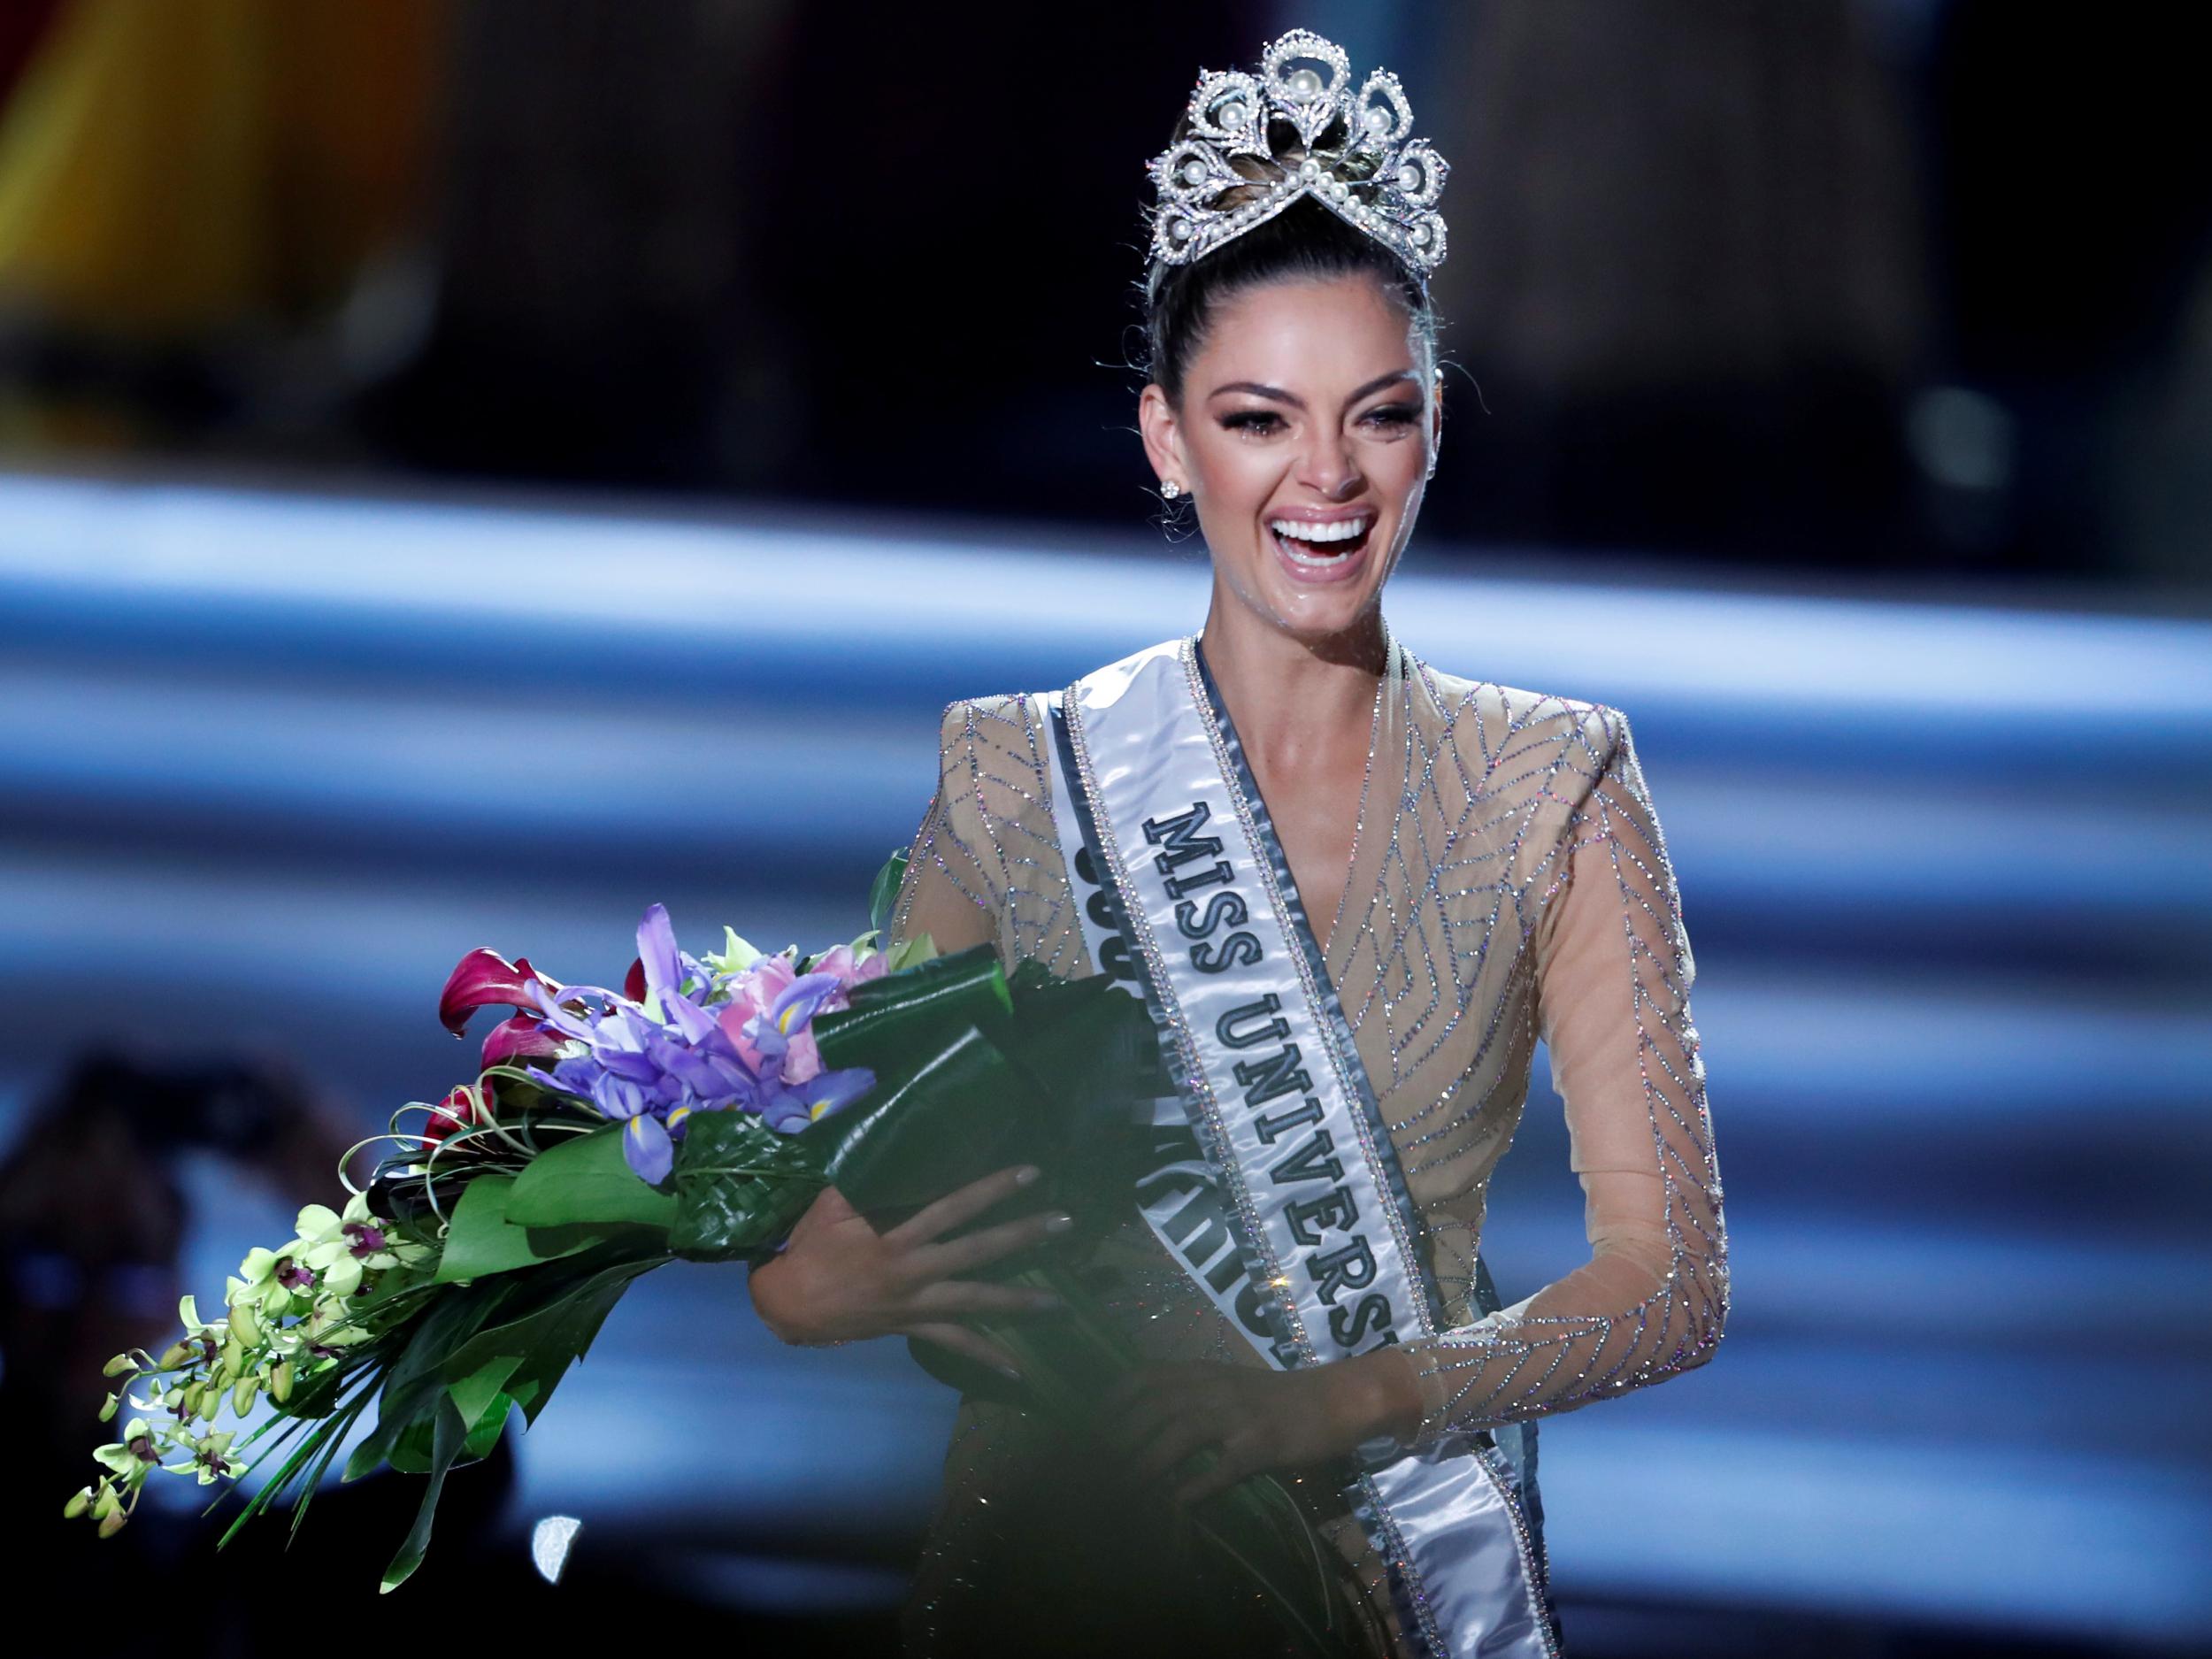 Miss South Africa Demi-Leigh Nel-Peters reacts after being crowned Miss Universe during the 66th Miss Universe pageant at Planet Hollywood hotel-casino in Las Vegas, Nevada